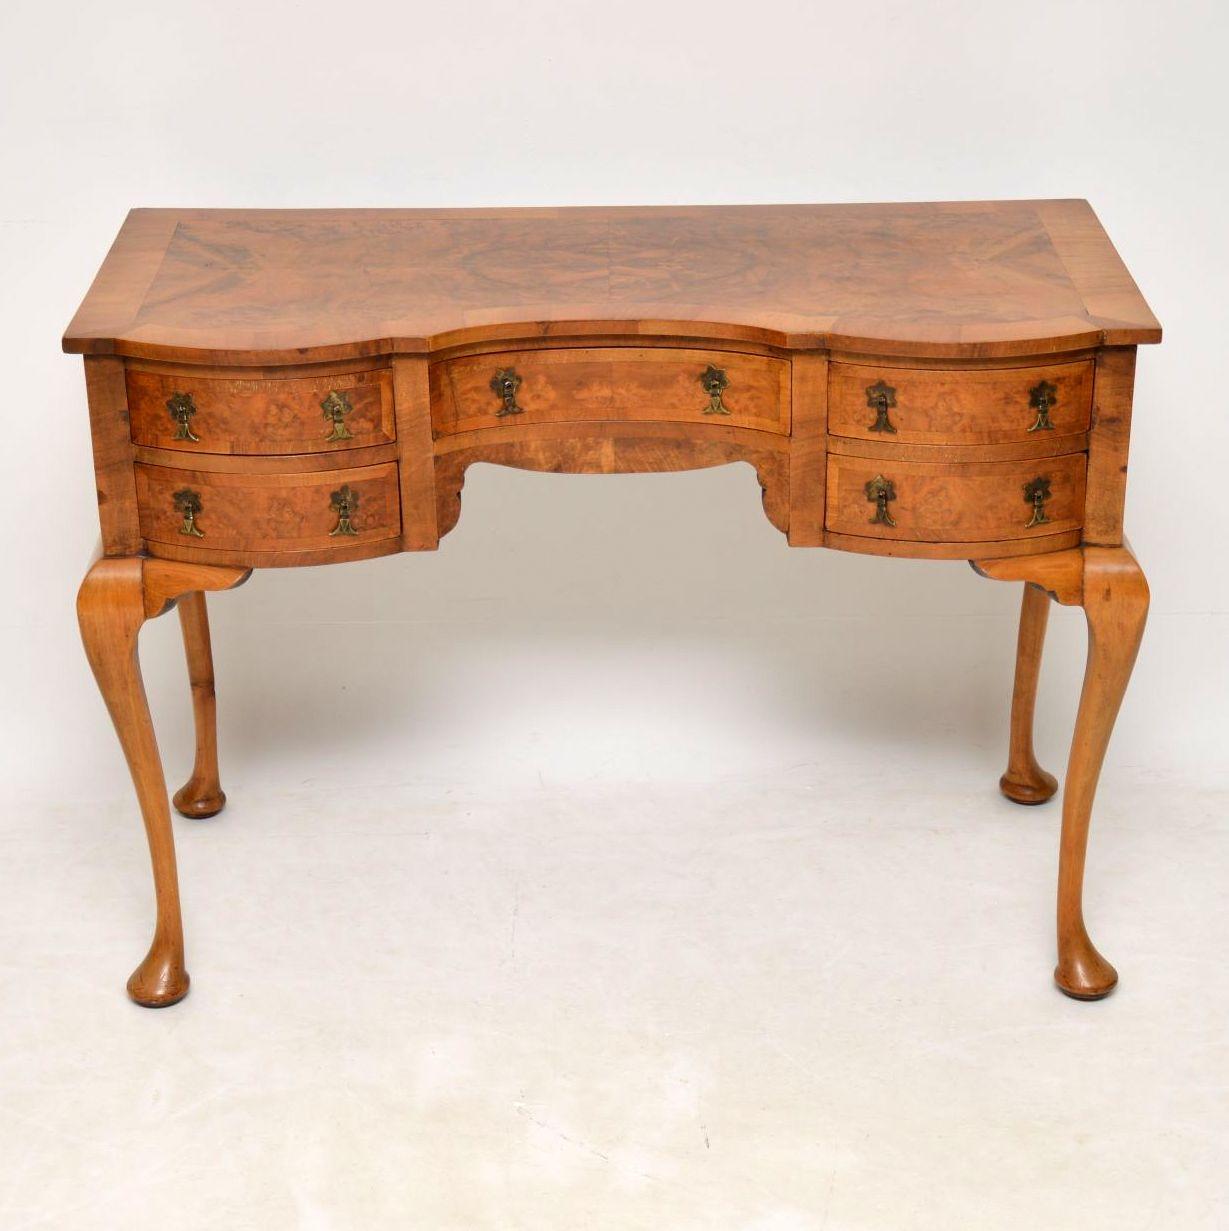 This well shaped antique walnut table could be used as a desk, dressing table, or just a side table. It’s fine quality and dates to around the 1920s period. The top is burr walnut with cross banding and the same goes for the drawers which have the